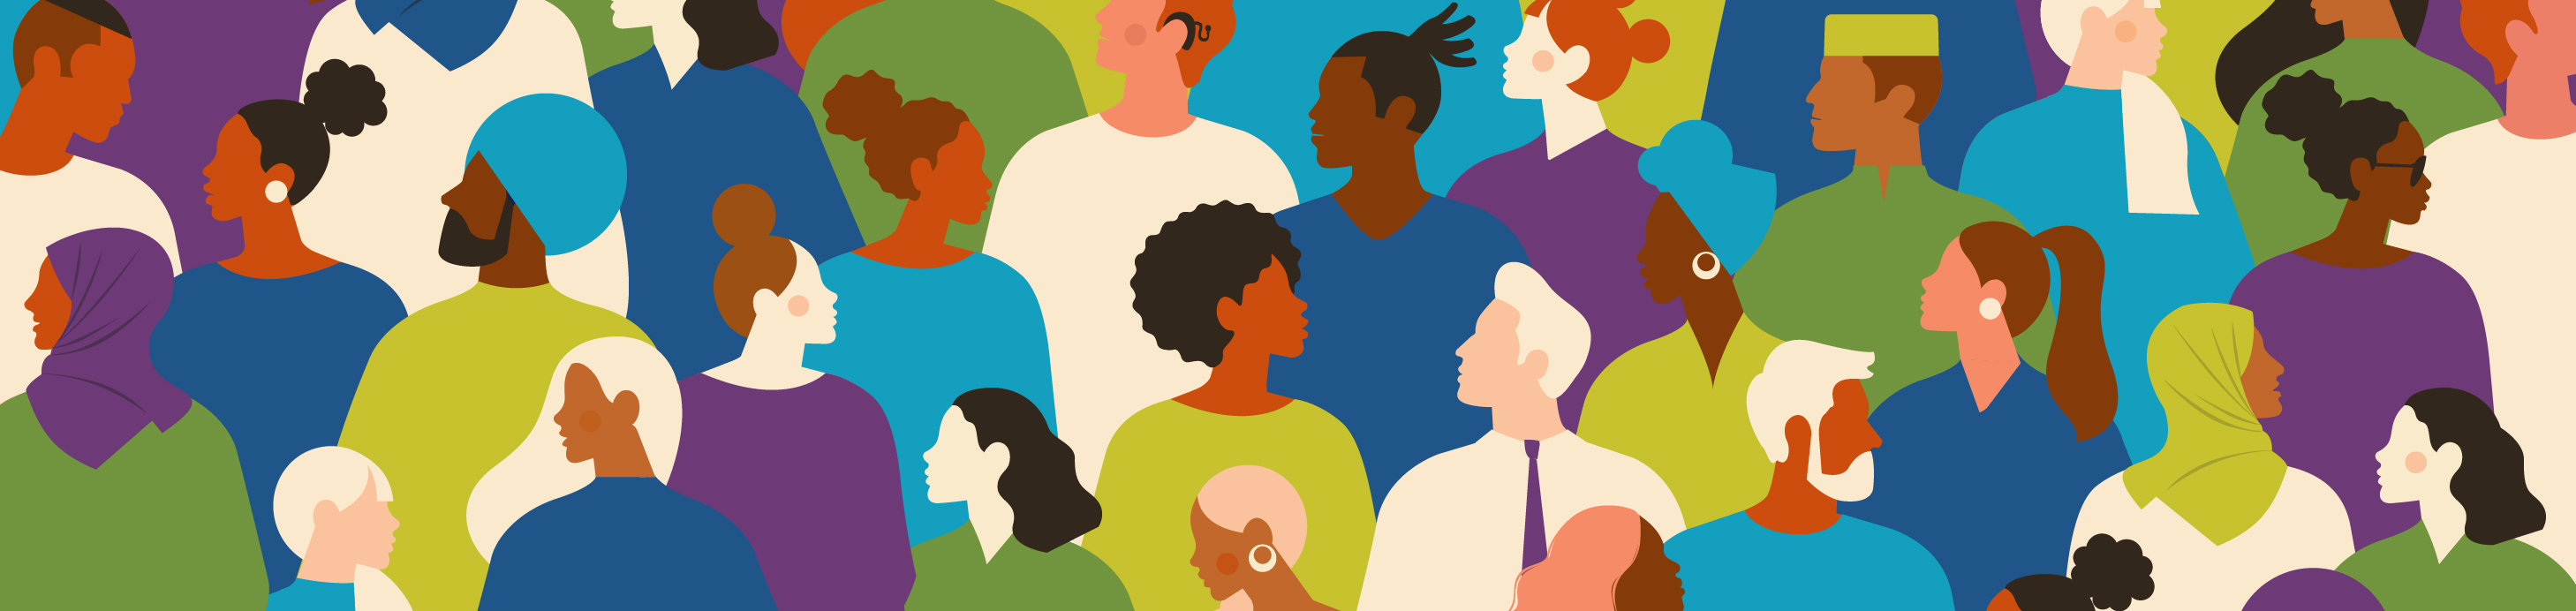 Illustration depicting a diverse assembly of people